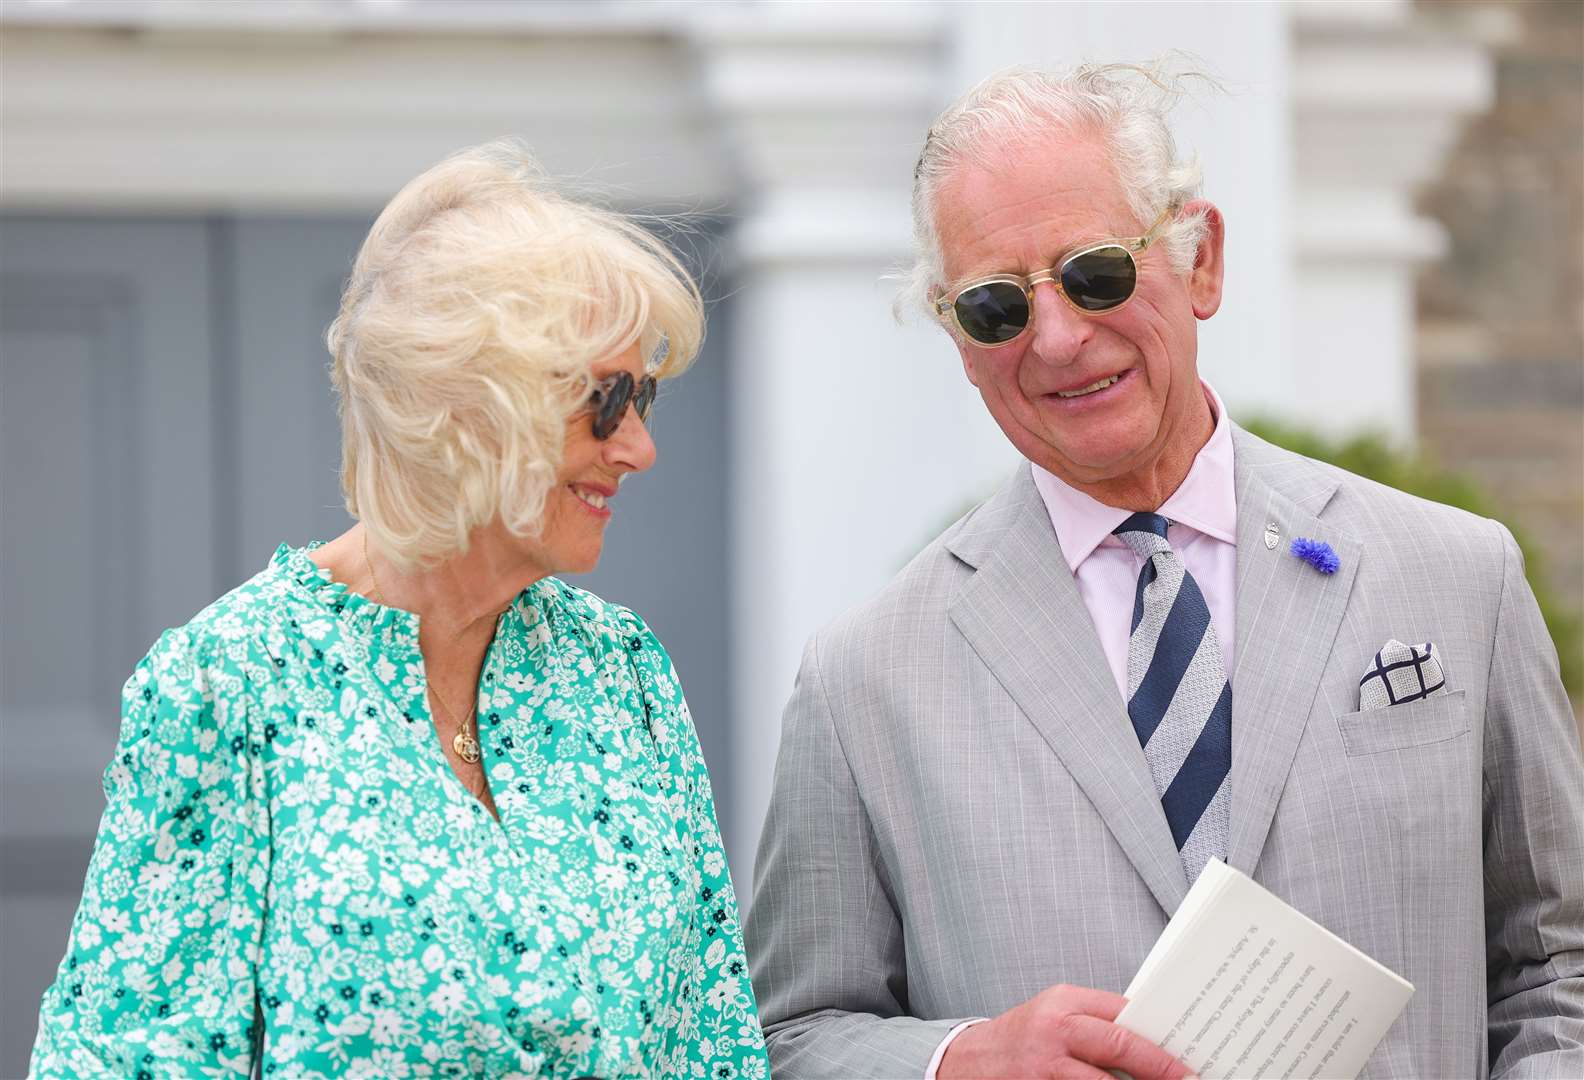 The Prince of Wales and the Duchess of Cornwall (Chris Jackson/PA)